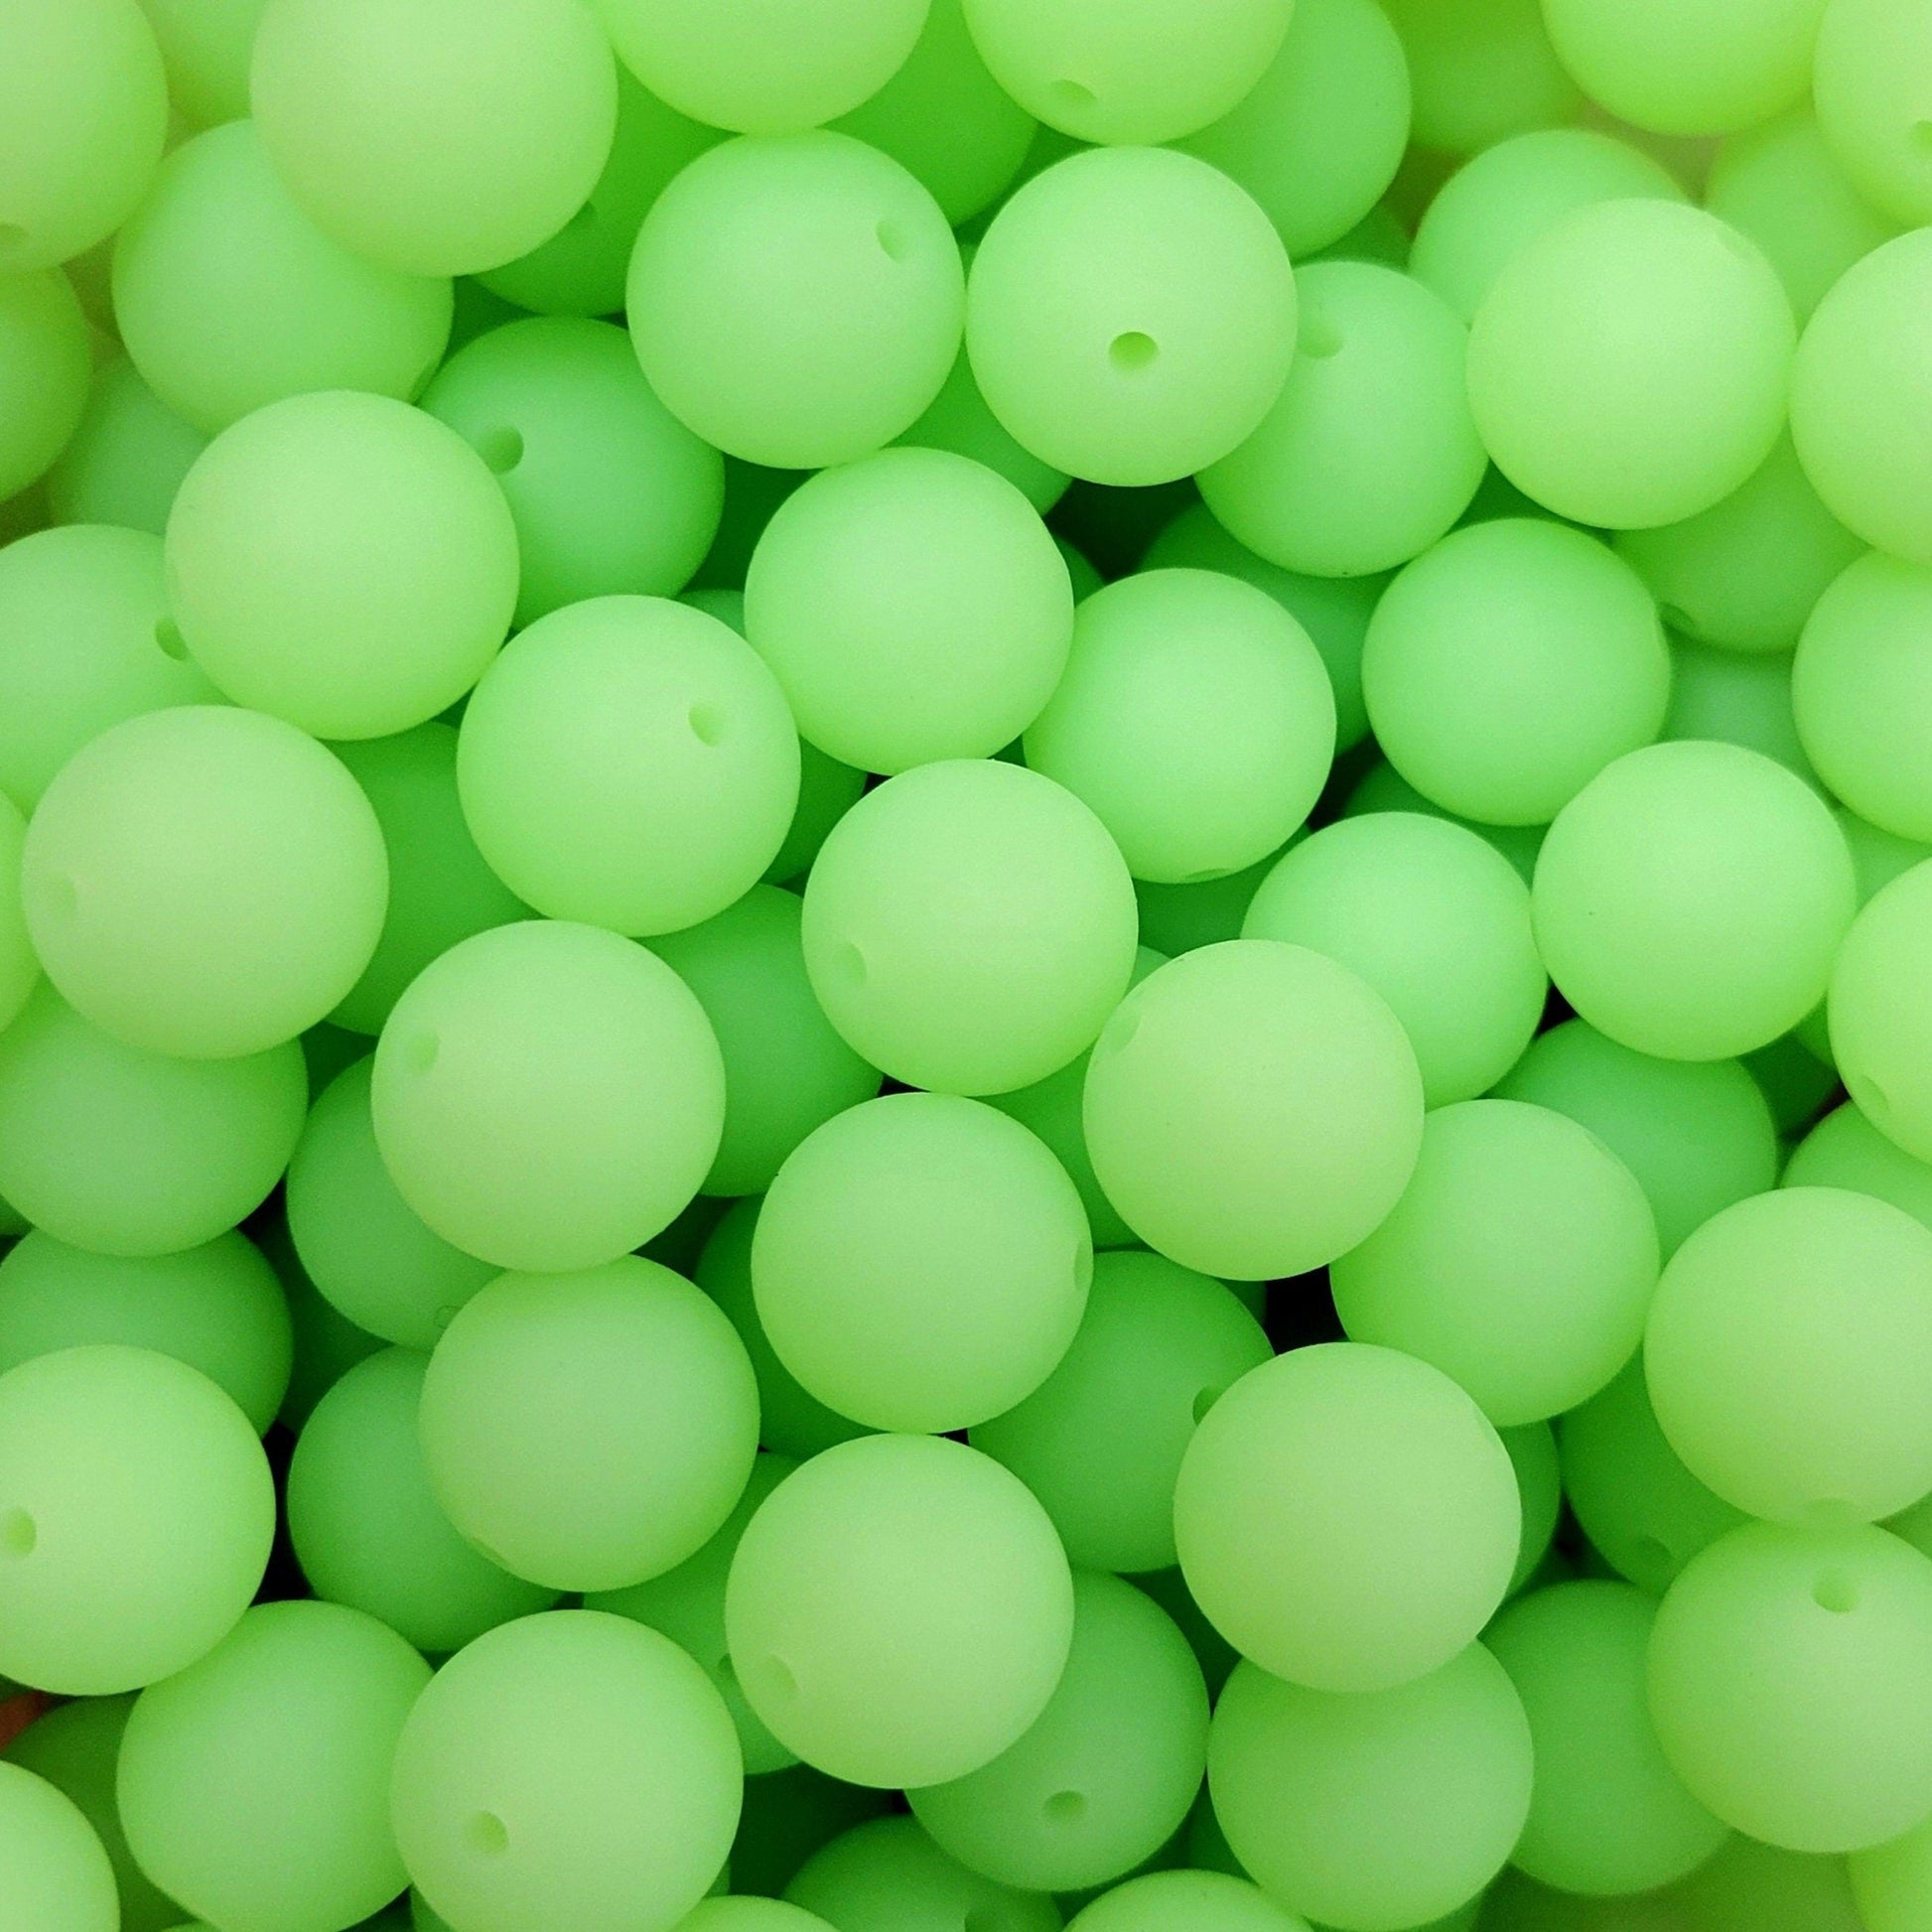 Glow in the Dark Round Silicone Beads